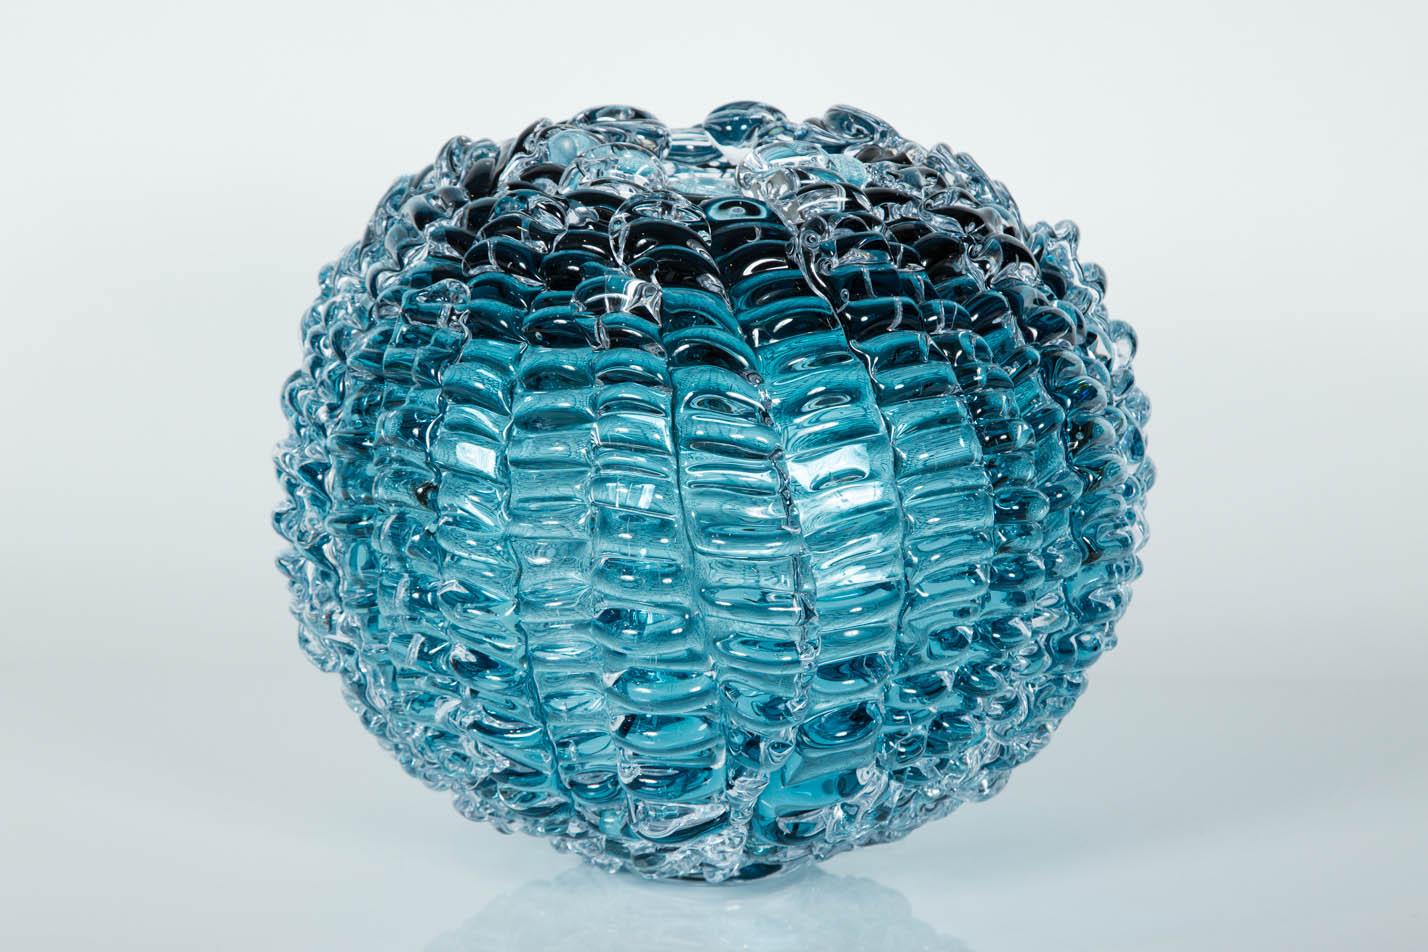 Hand-Crafted Echinus in Steel Blue, a blue glass centrepiece & sculpture by Katherine Huskie